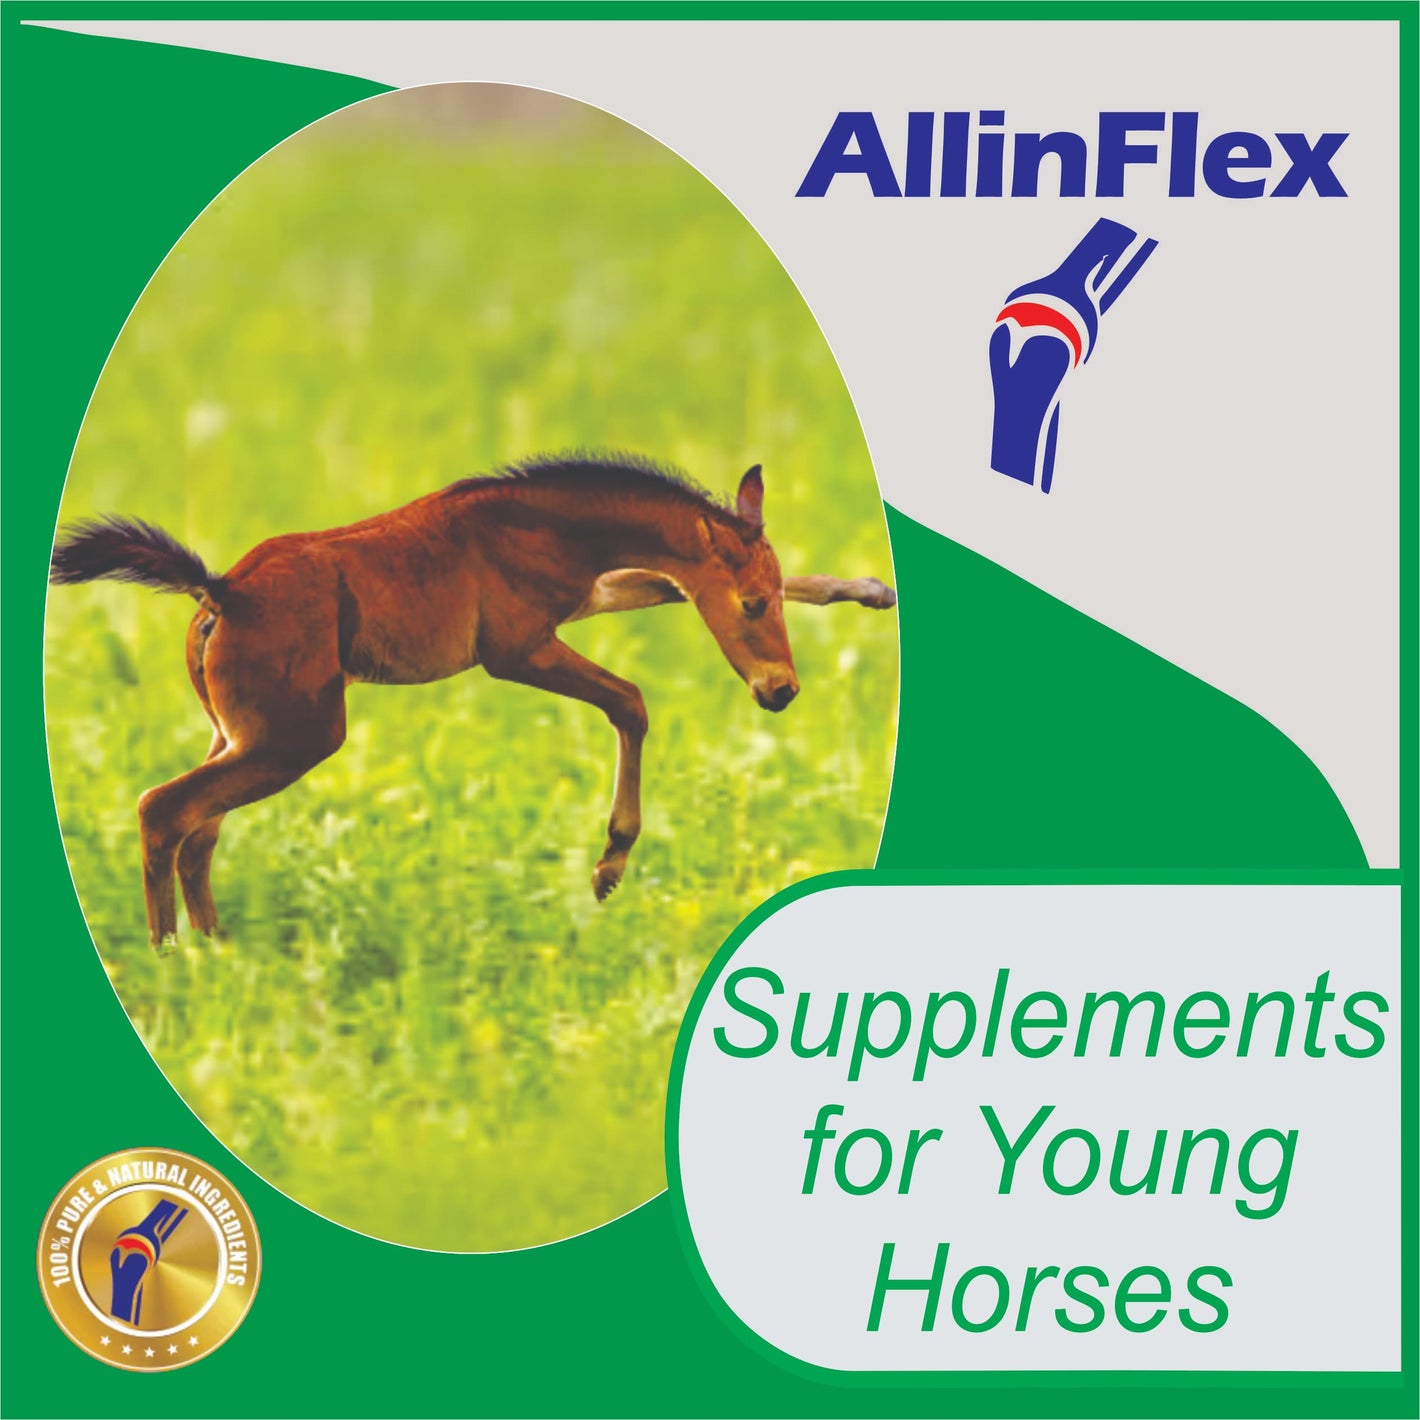 Young Growing Horse Yearling Supplements AllinFlex NZ